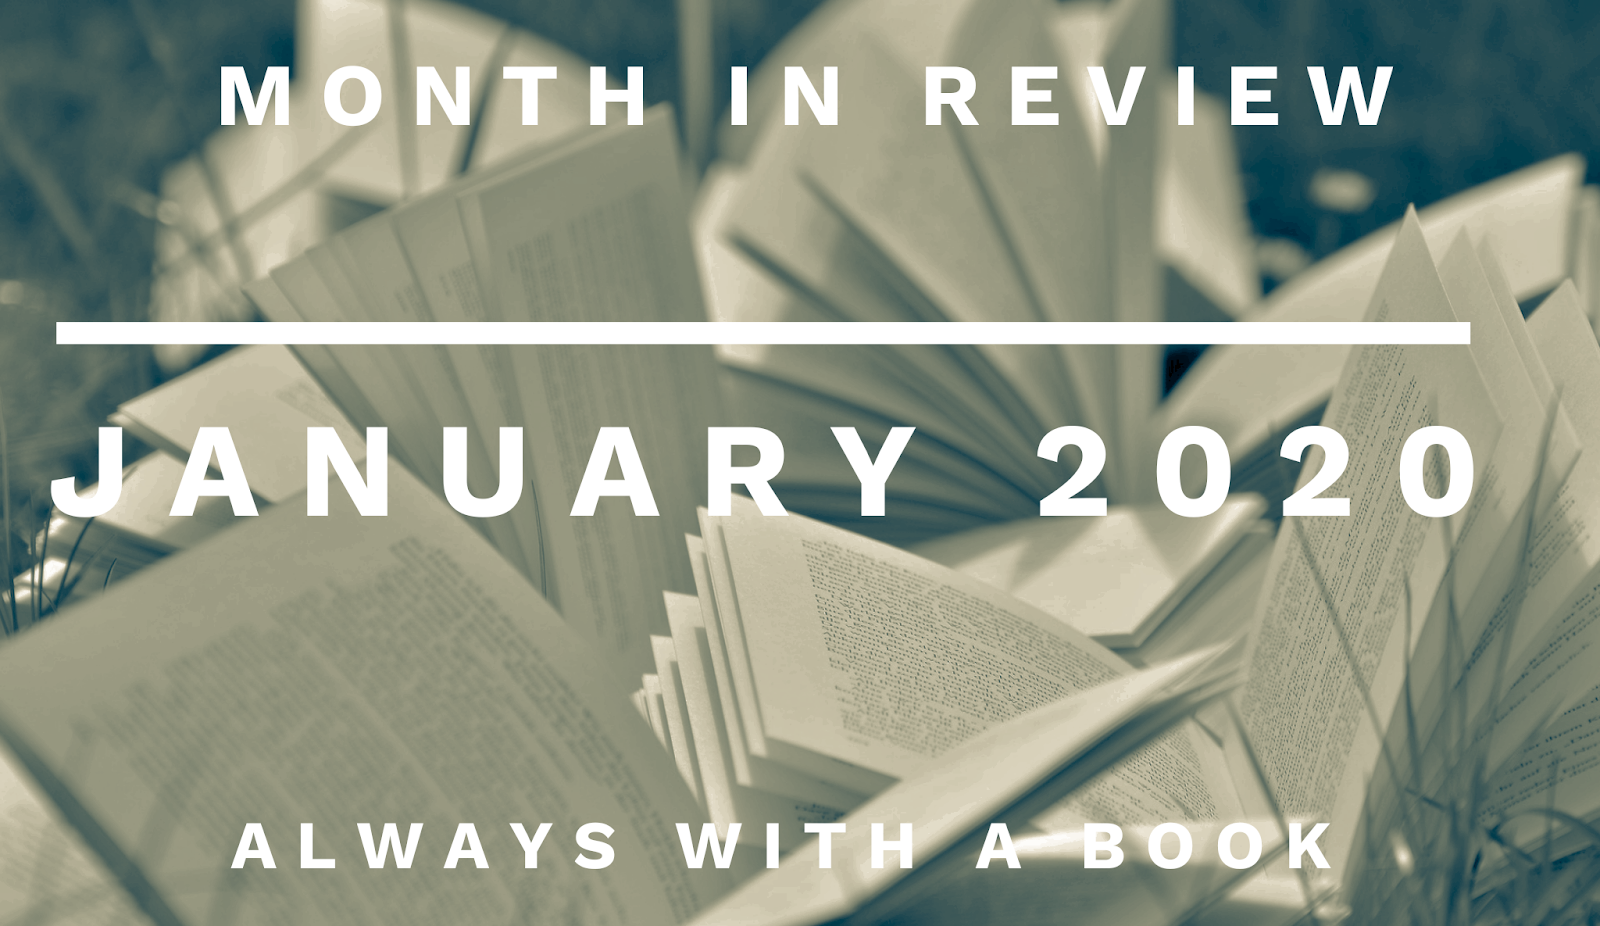 Month in Review: January 2020